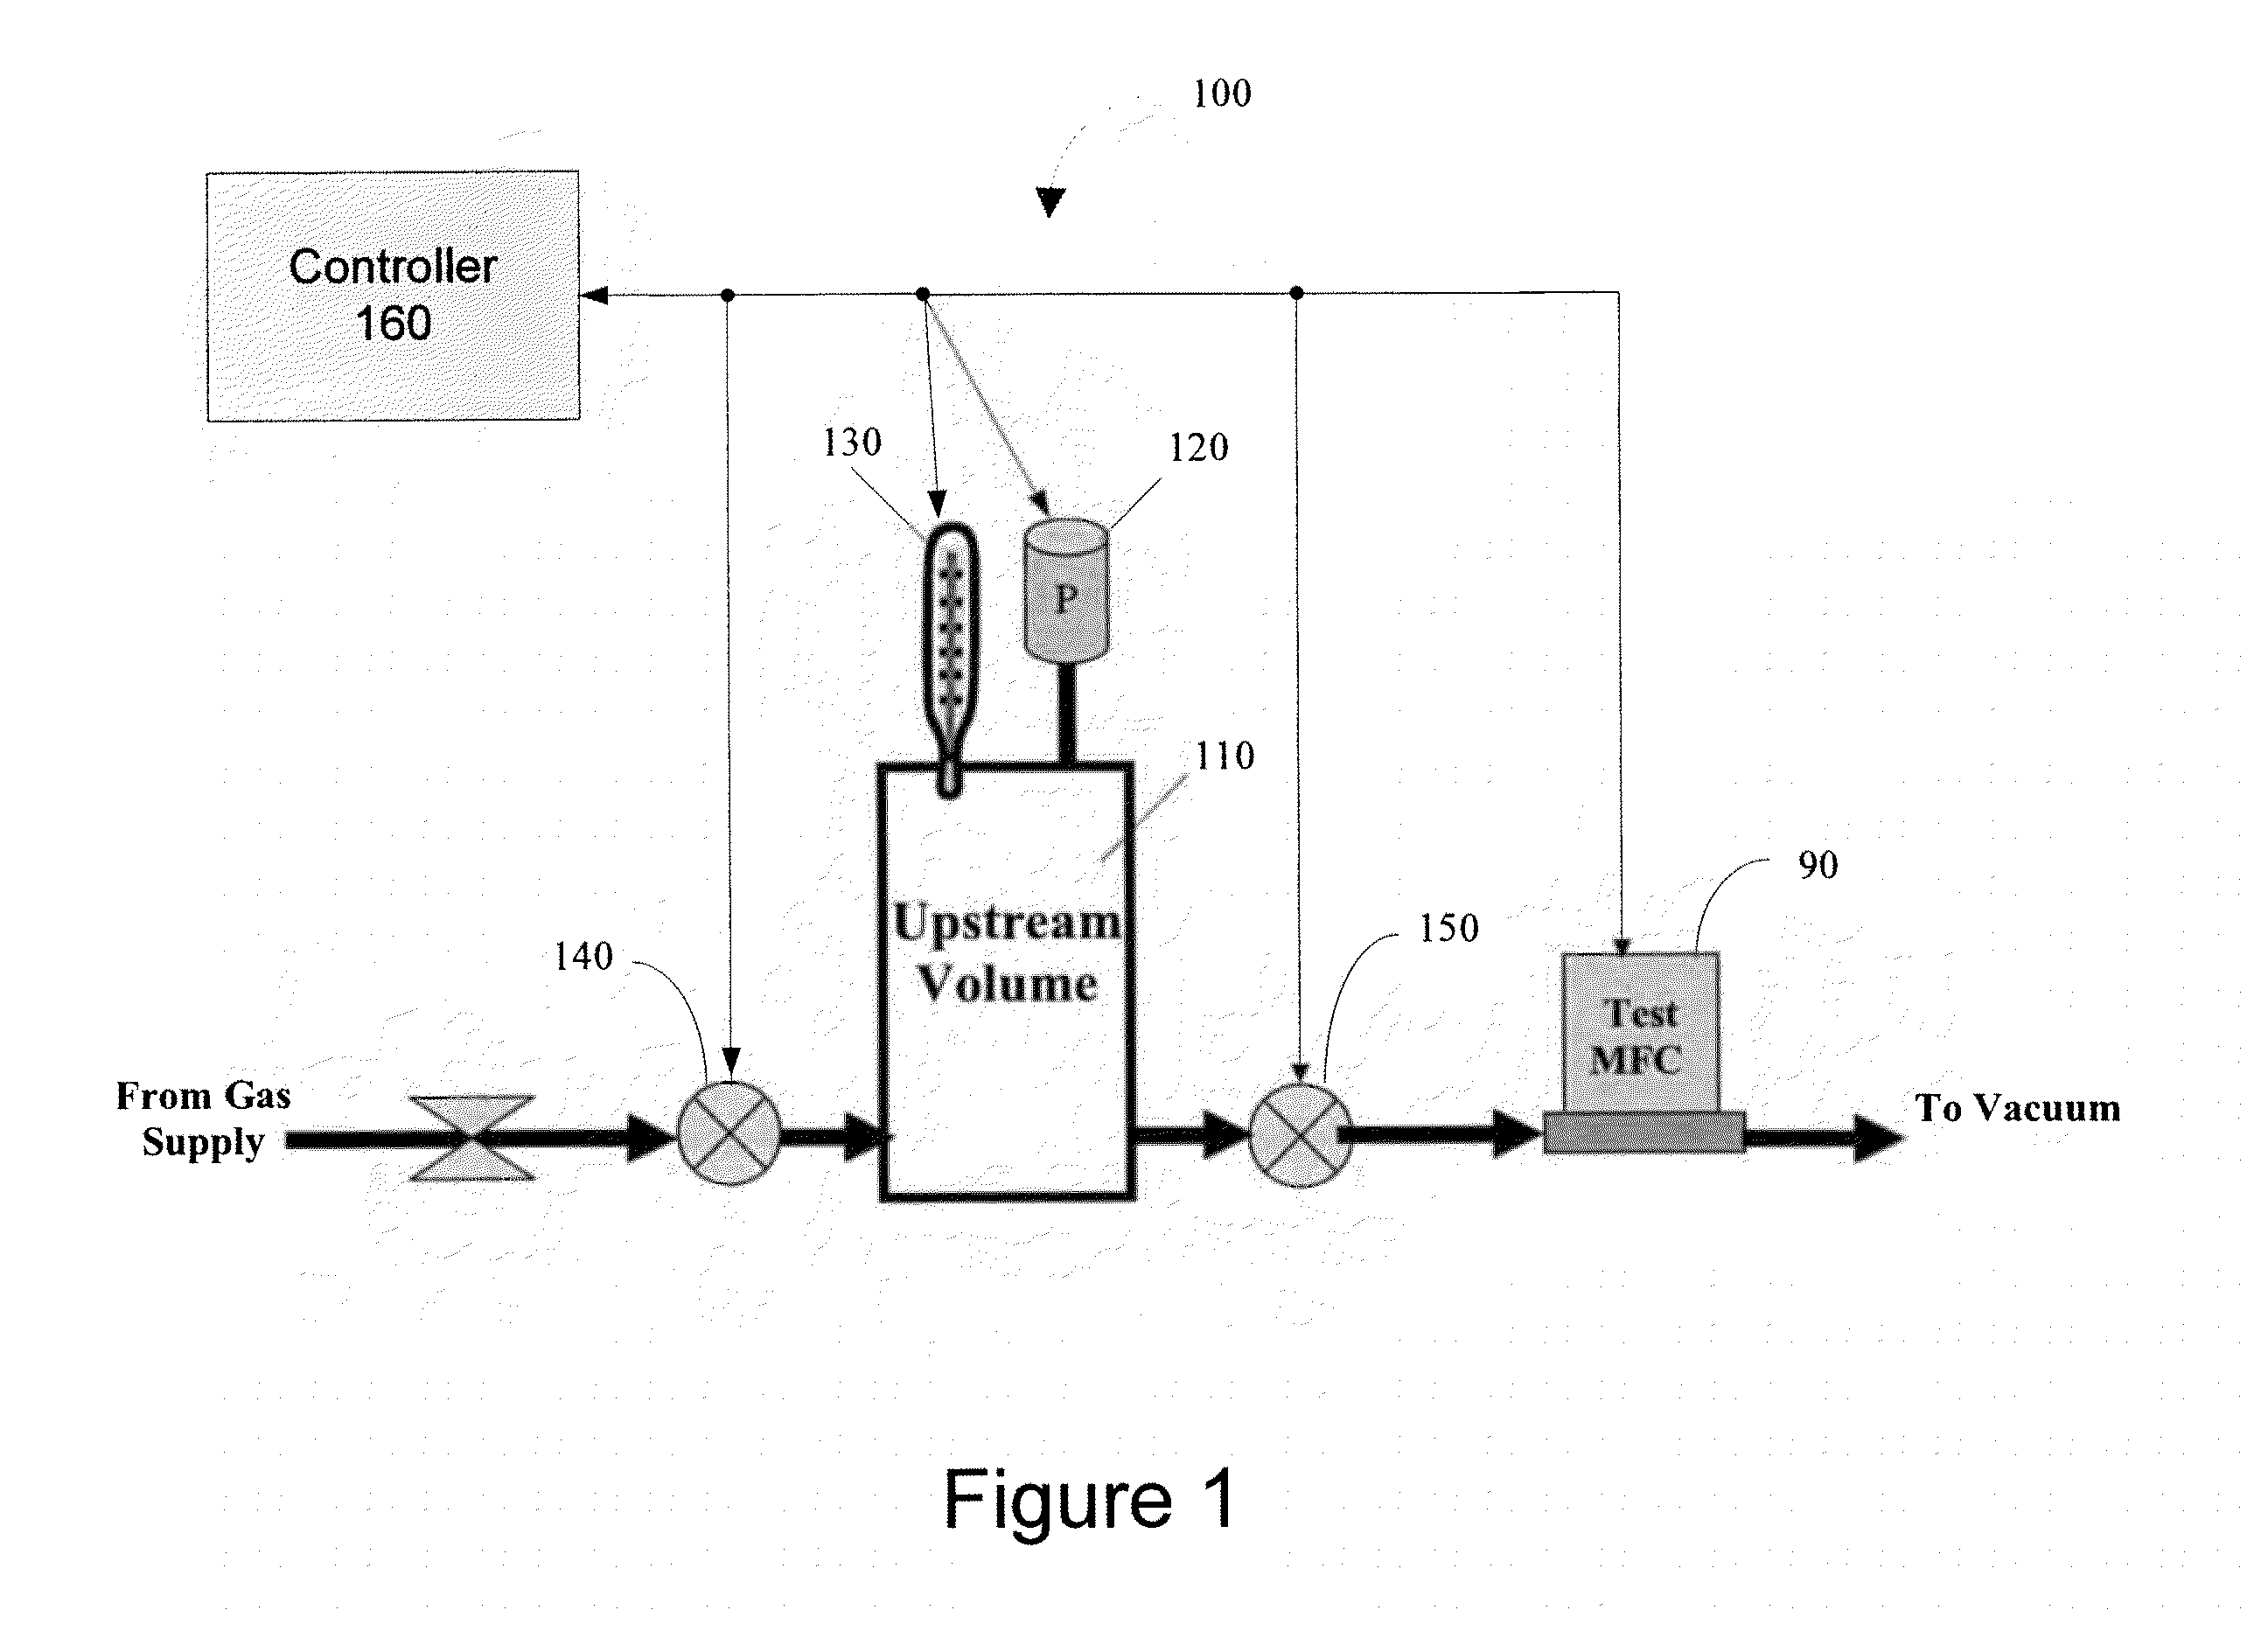 Upstream volume mass flow verification systems and methods field of the disclosure